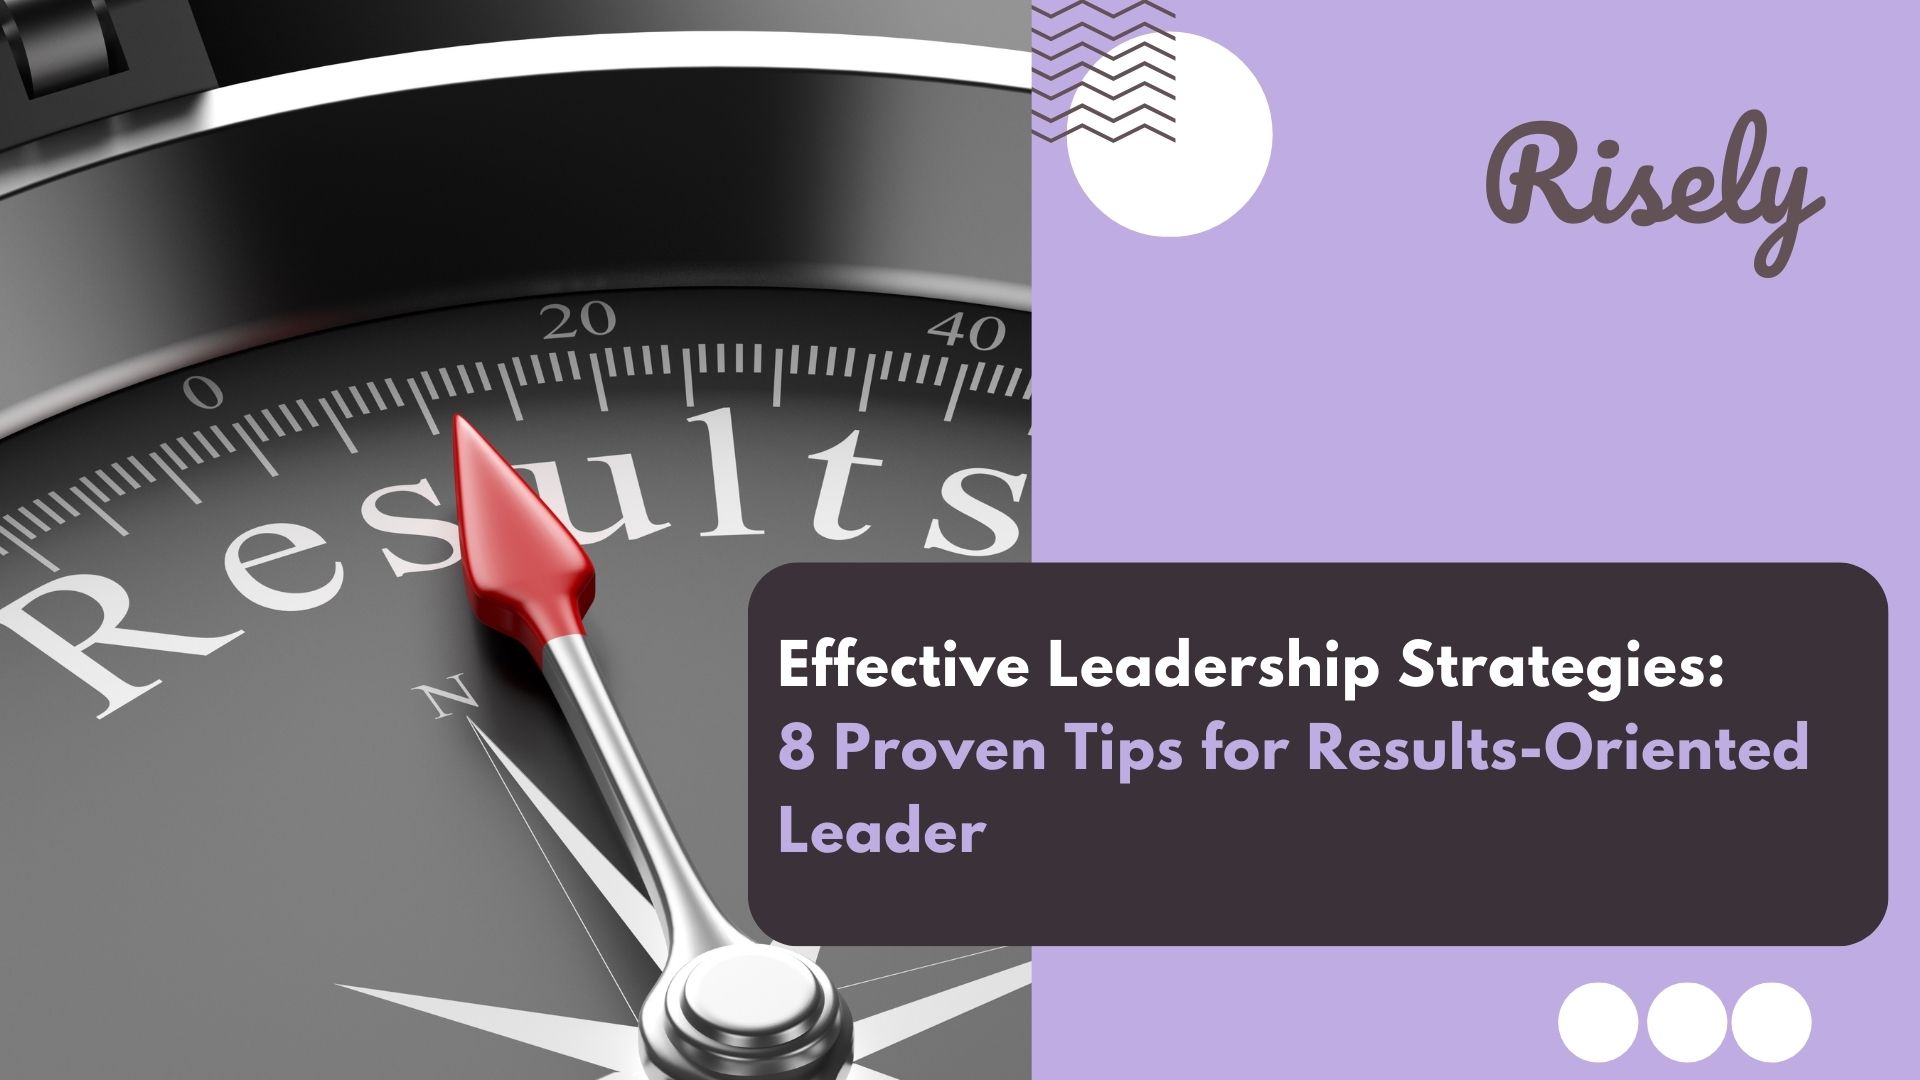 Effective Leadership Strategies: 8 Proven Tips for Results-Oriented Leader